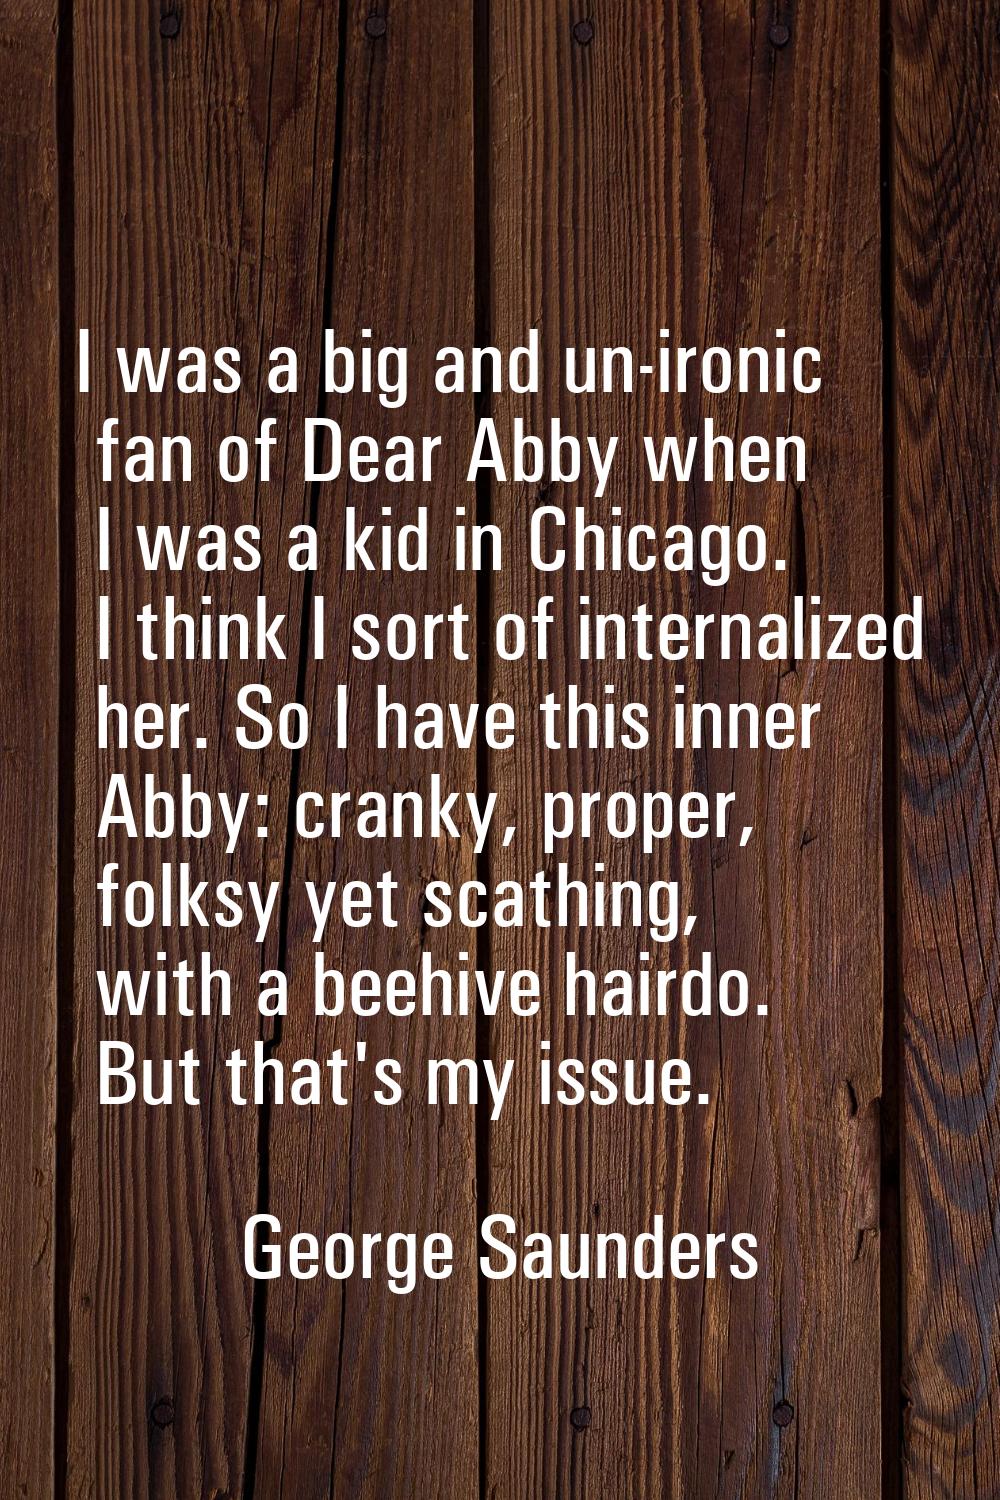 I was a big and un-ironic fan of Dear Abby when I was a kid in Chicago. I think I sort of internali